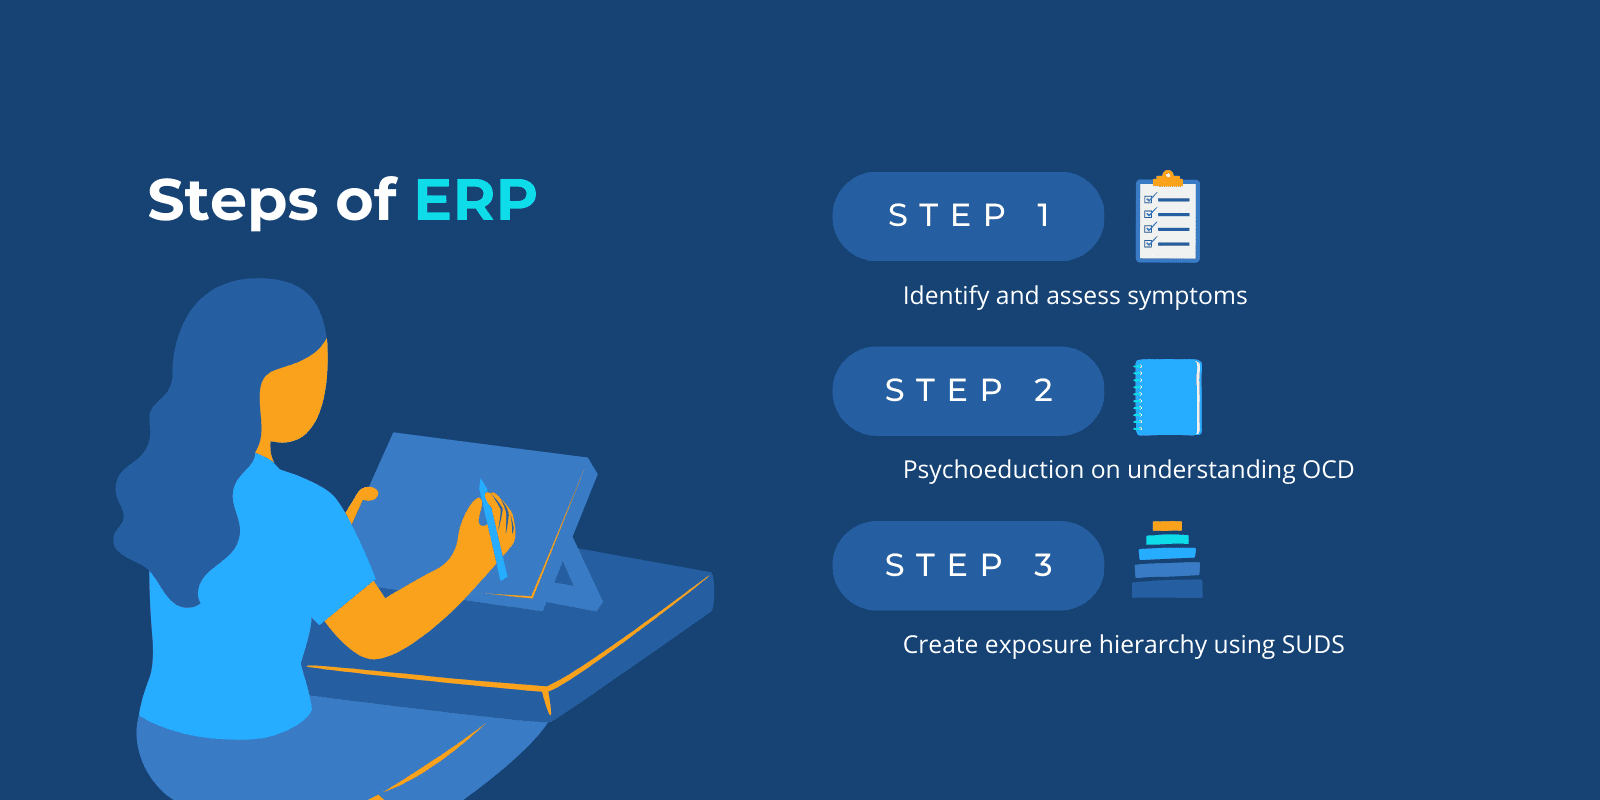 An illustration person taking notes next to 3 steps of ERP with relevant icons